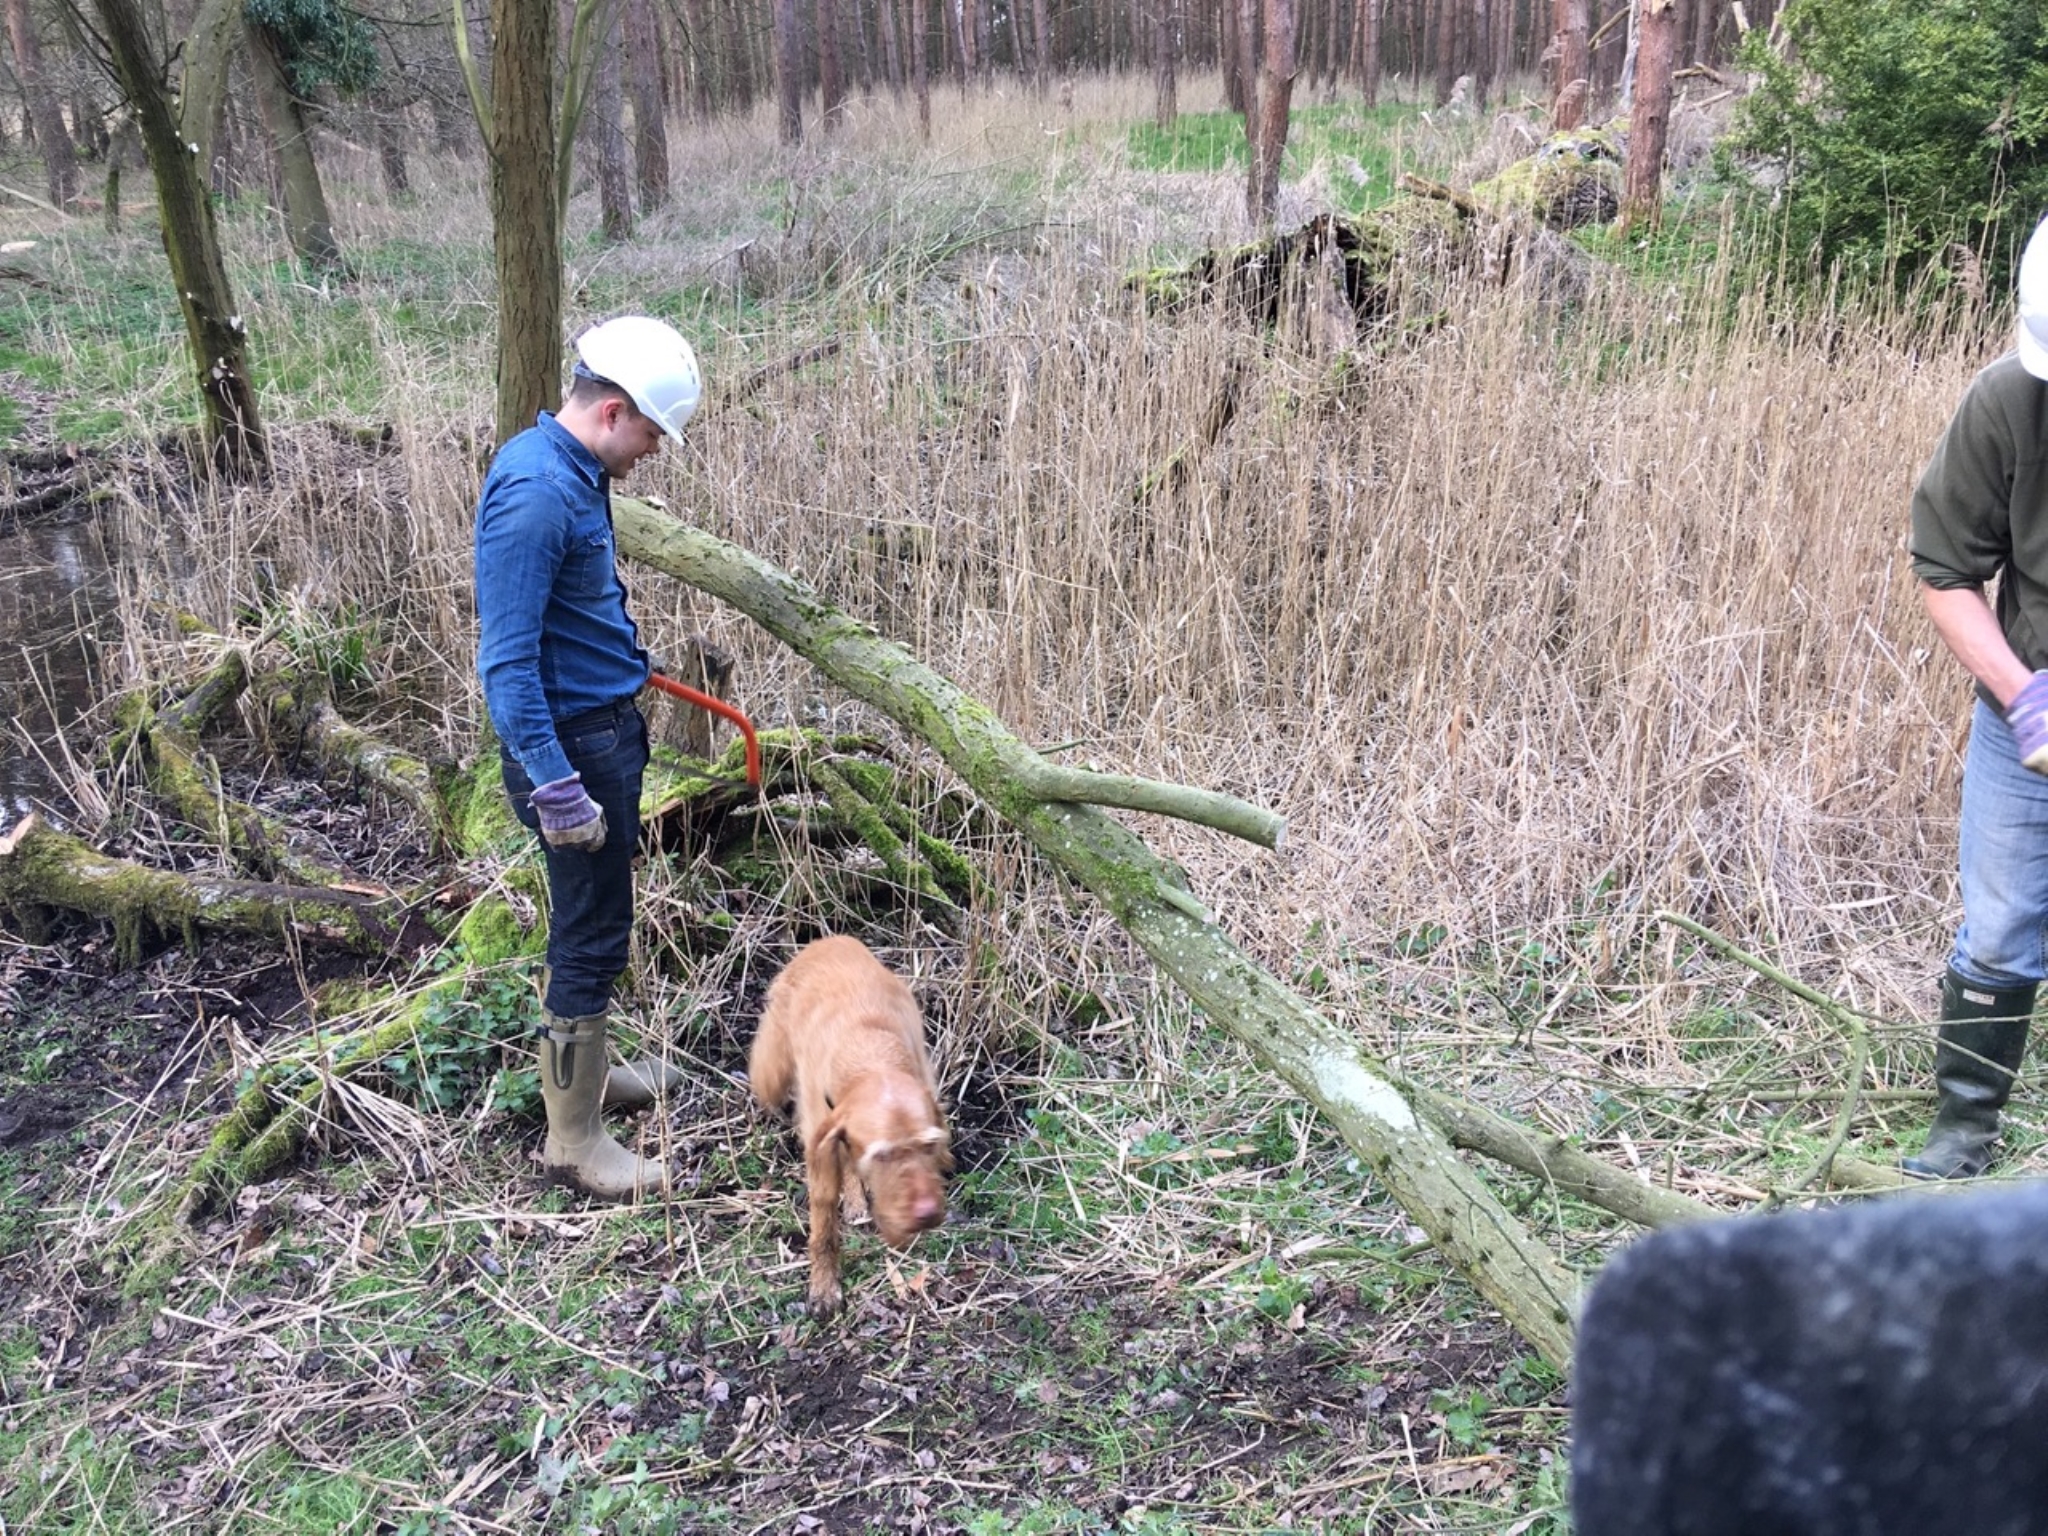 A photo from the FoTF Conservation Event - March 2019 - Clearance work around, and in, the ponds at Harling Woods, Harling : The dog skulks aways after being asked to move